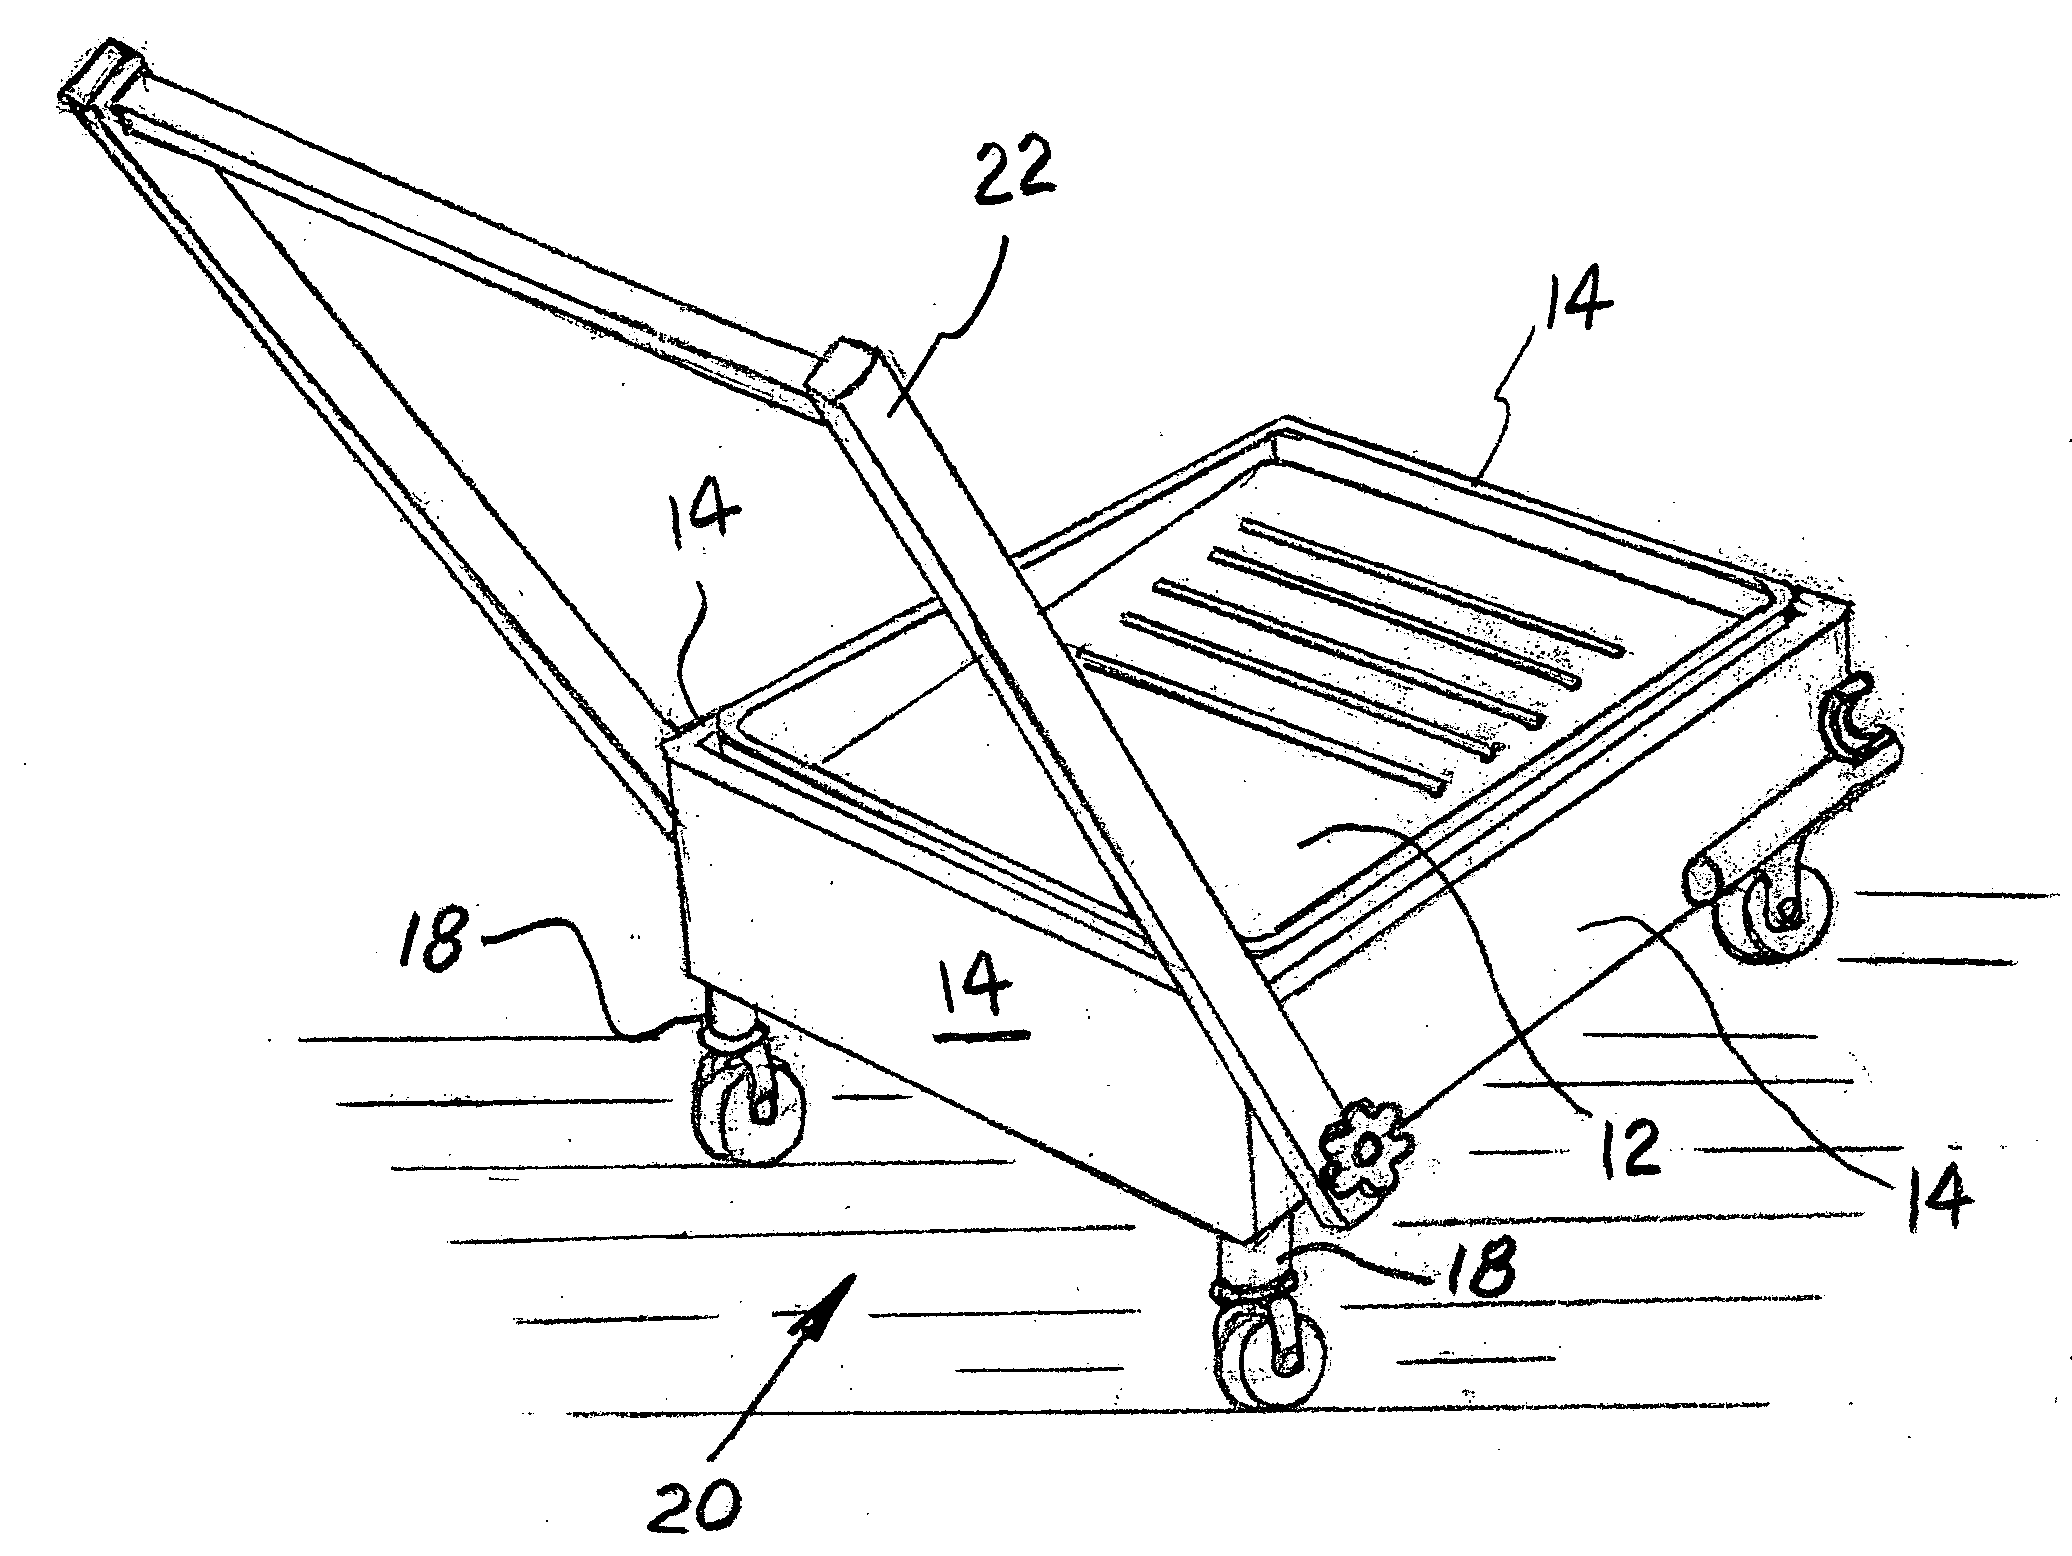 Apparatus for holding a paint tray